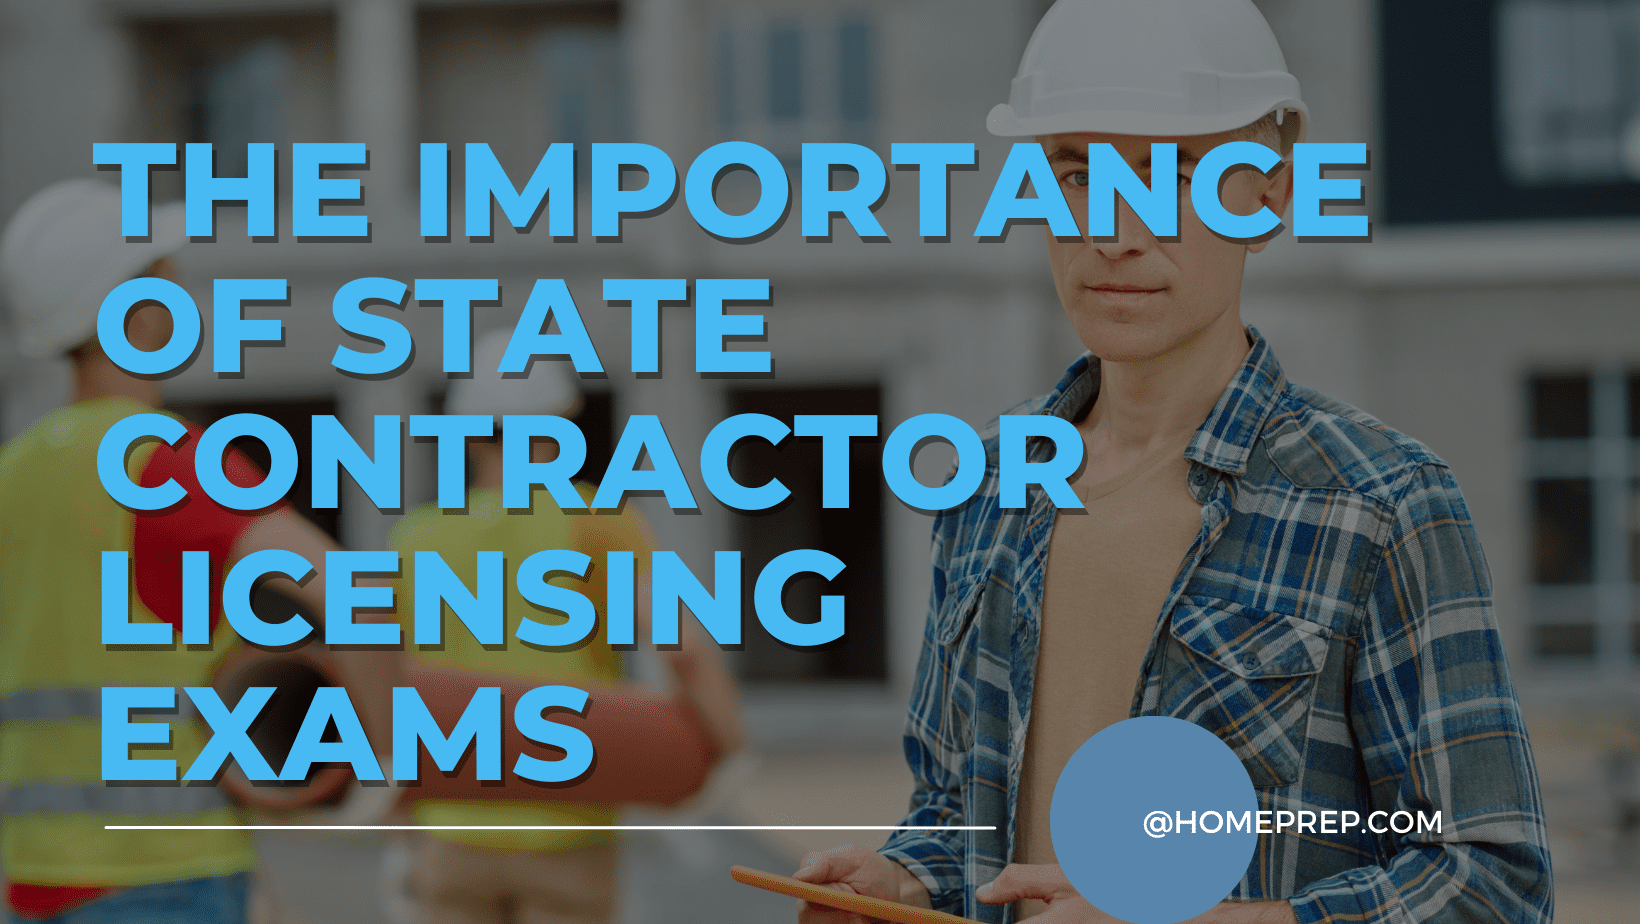 The Role of Continuing Education in Maintaining Your Contractor License